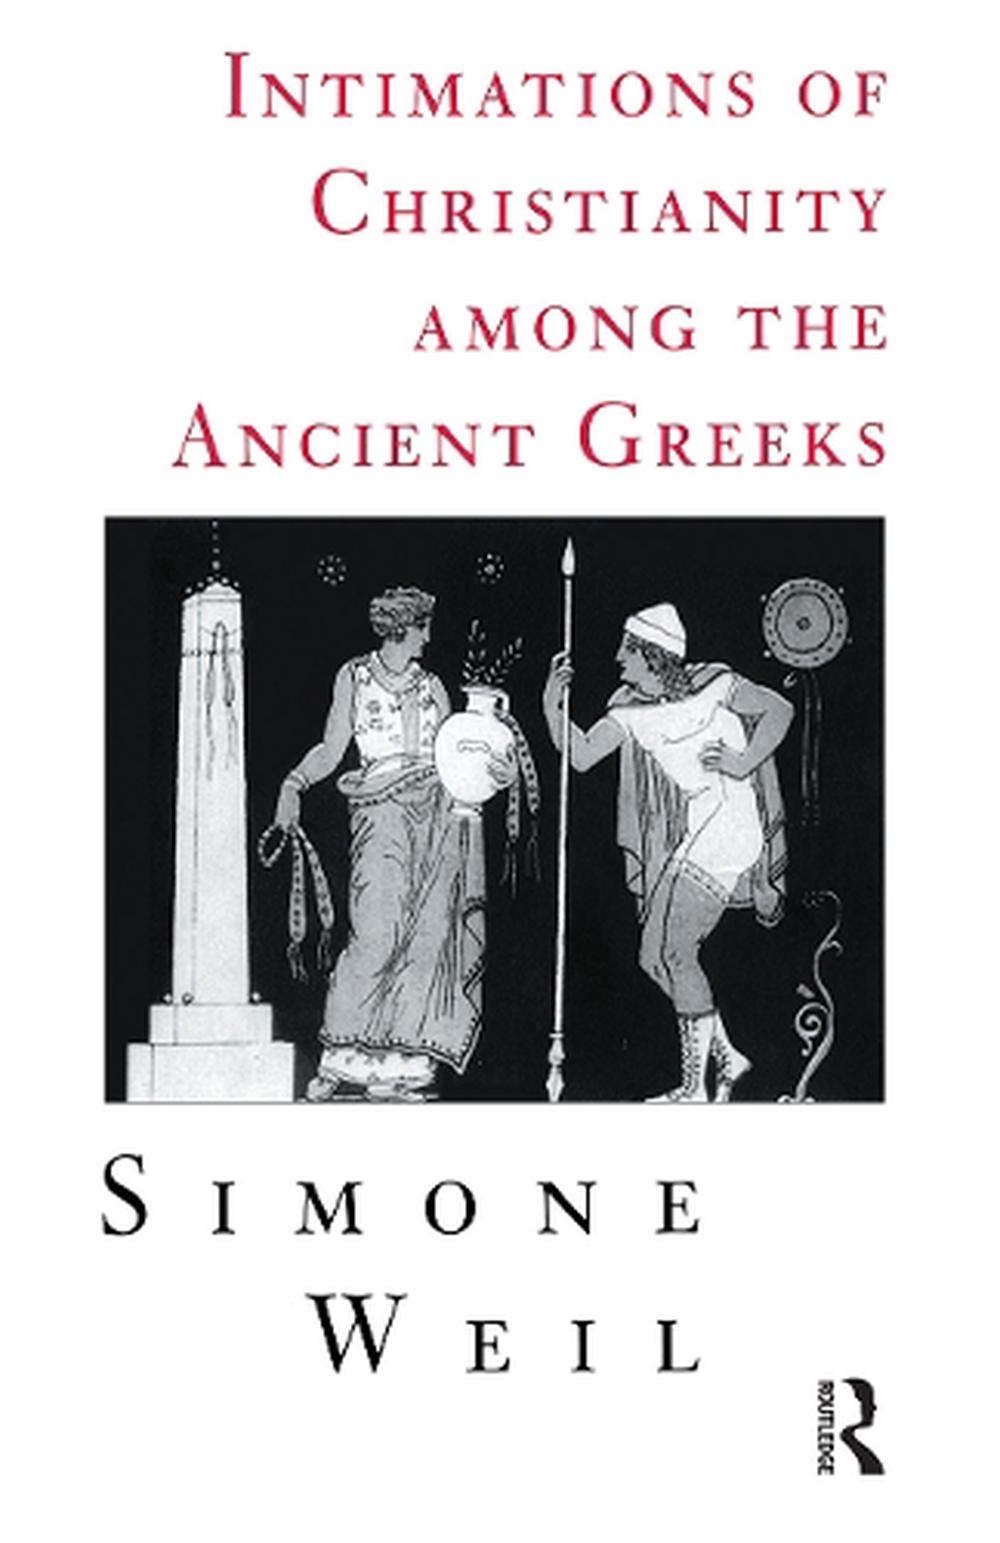 Intimations of Christianity Among the Ancient Greeks by Simone Weil (English) Pa 9780415186629